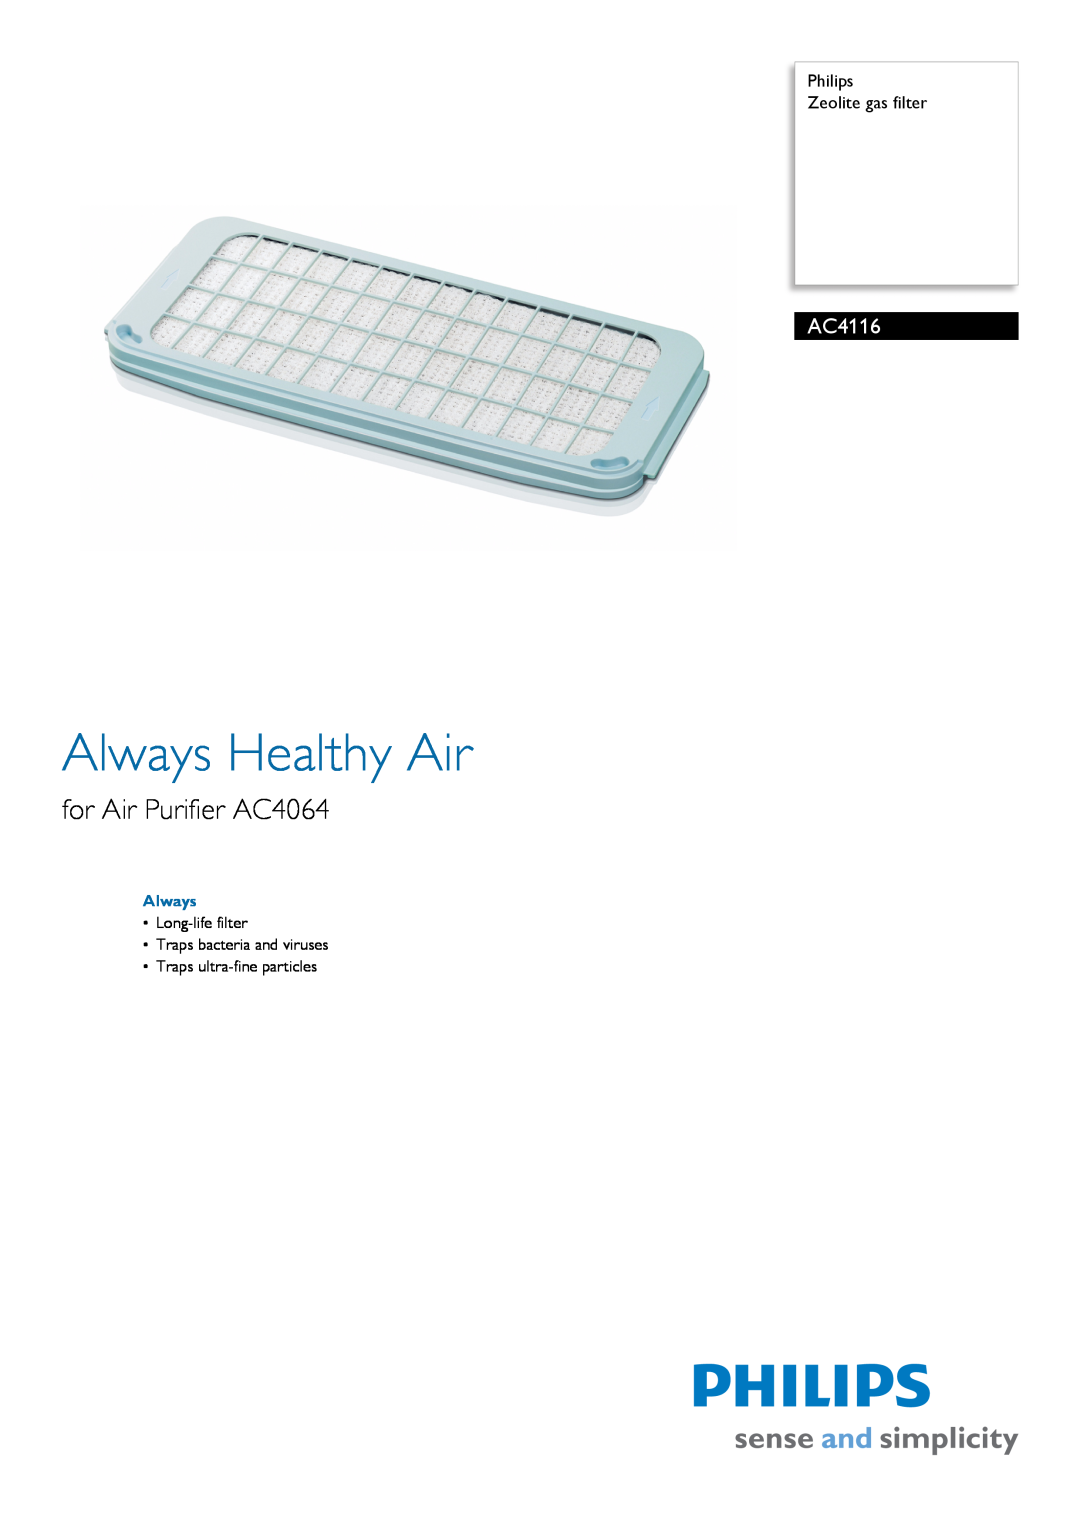 Philips AC4116 manual Philips Zeolite gas filter, Always Healthy Air, for Air Purifier AC4064 